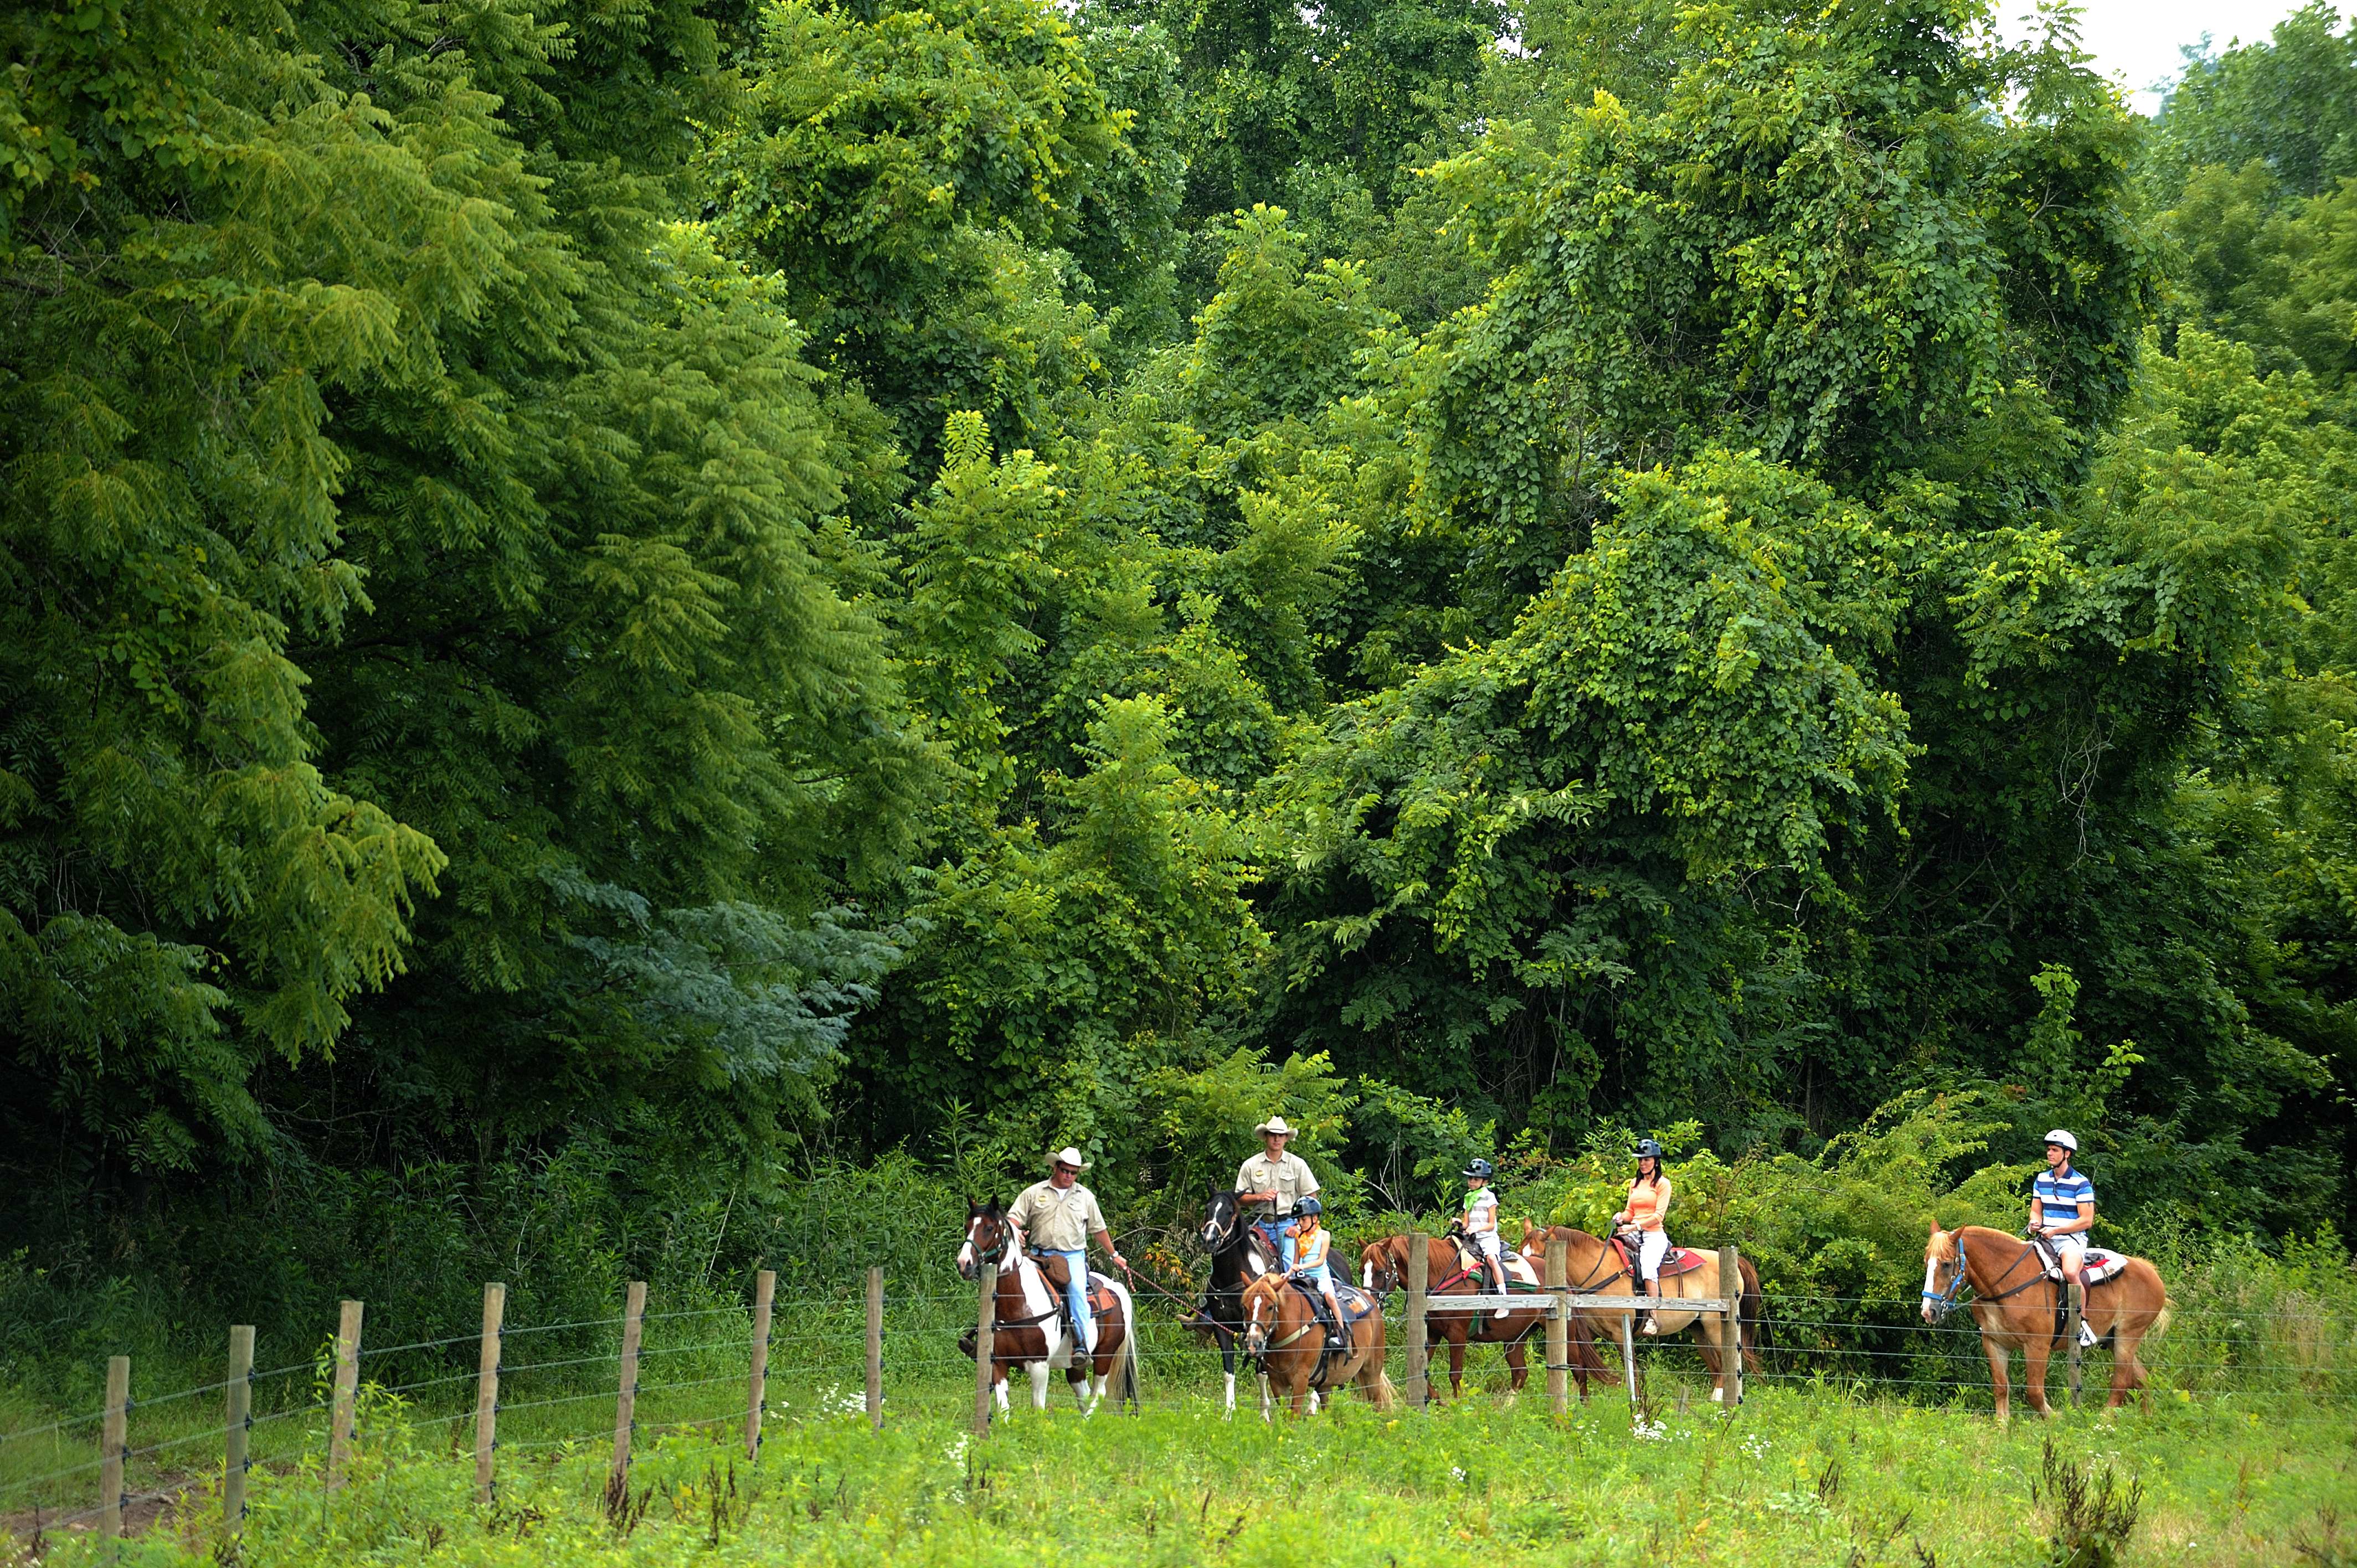 a group of people riding horses